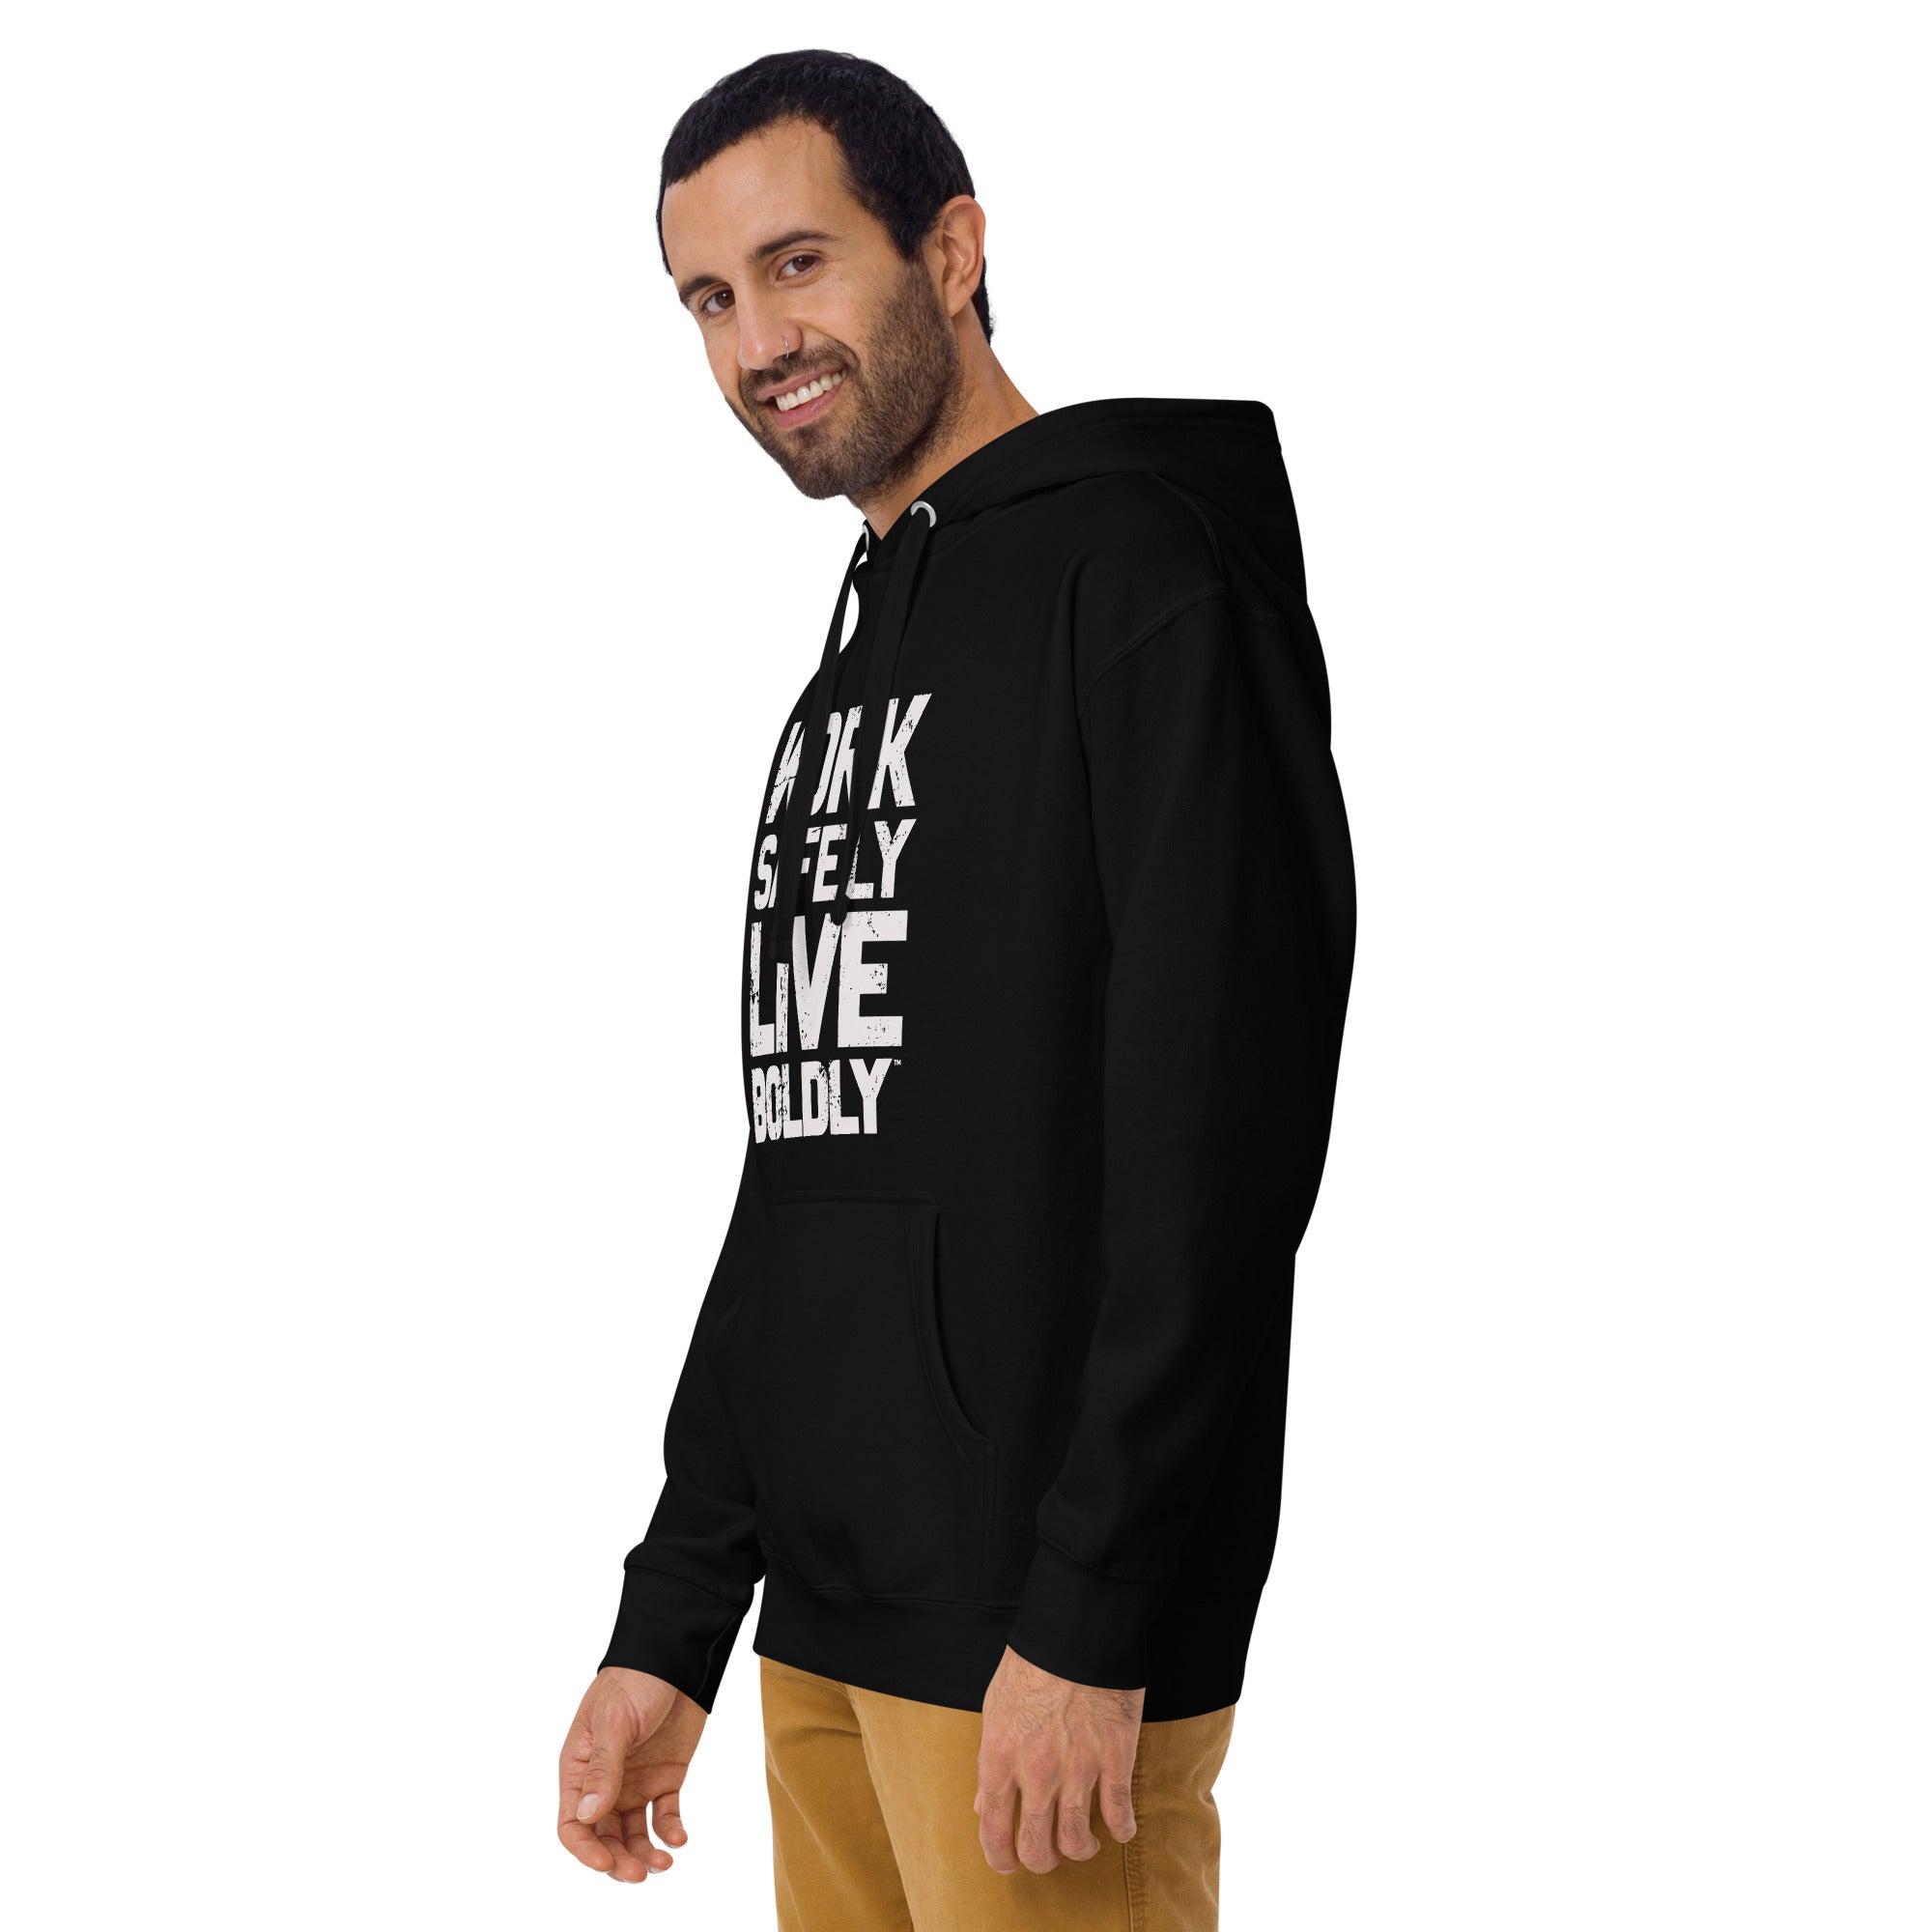 Work Safely, Live Boldly© Unisex Hoodie